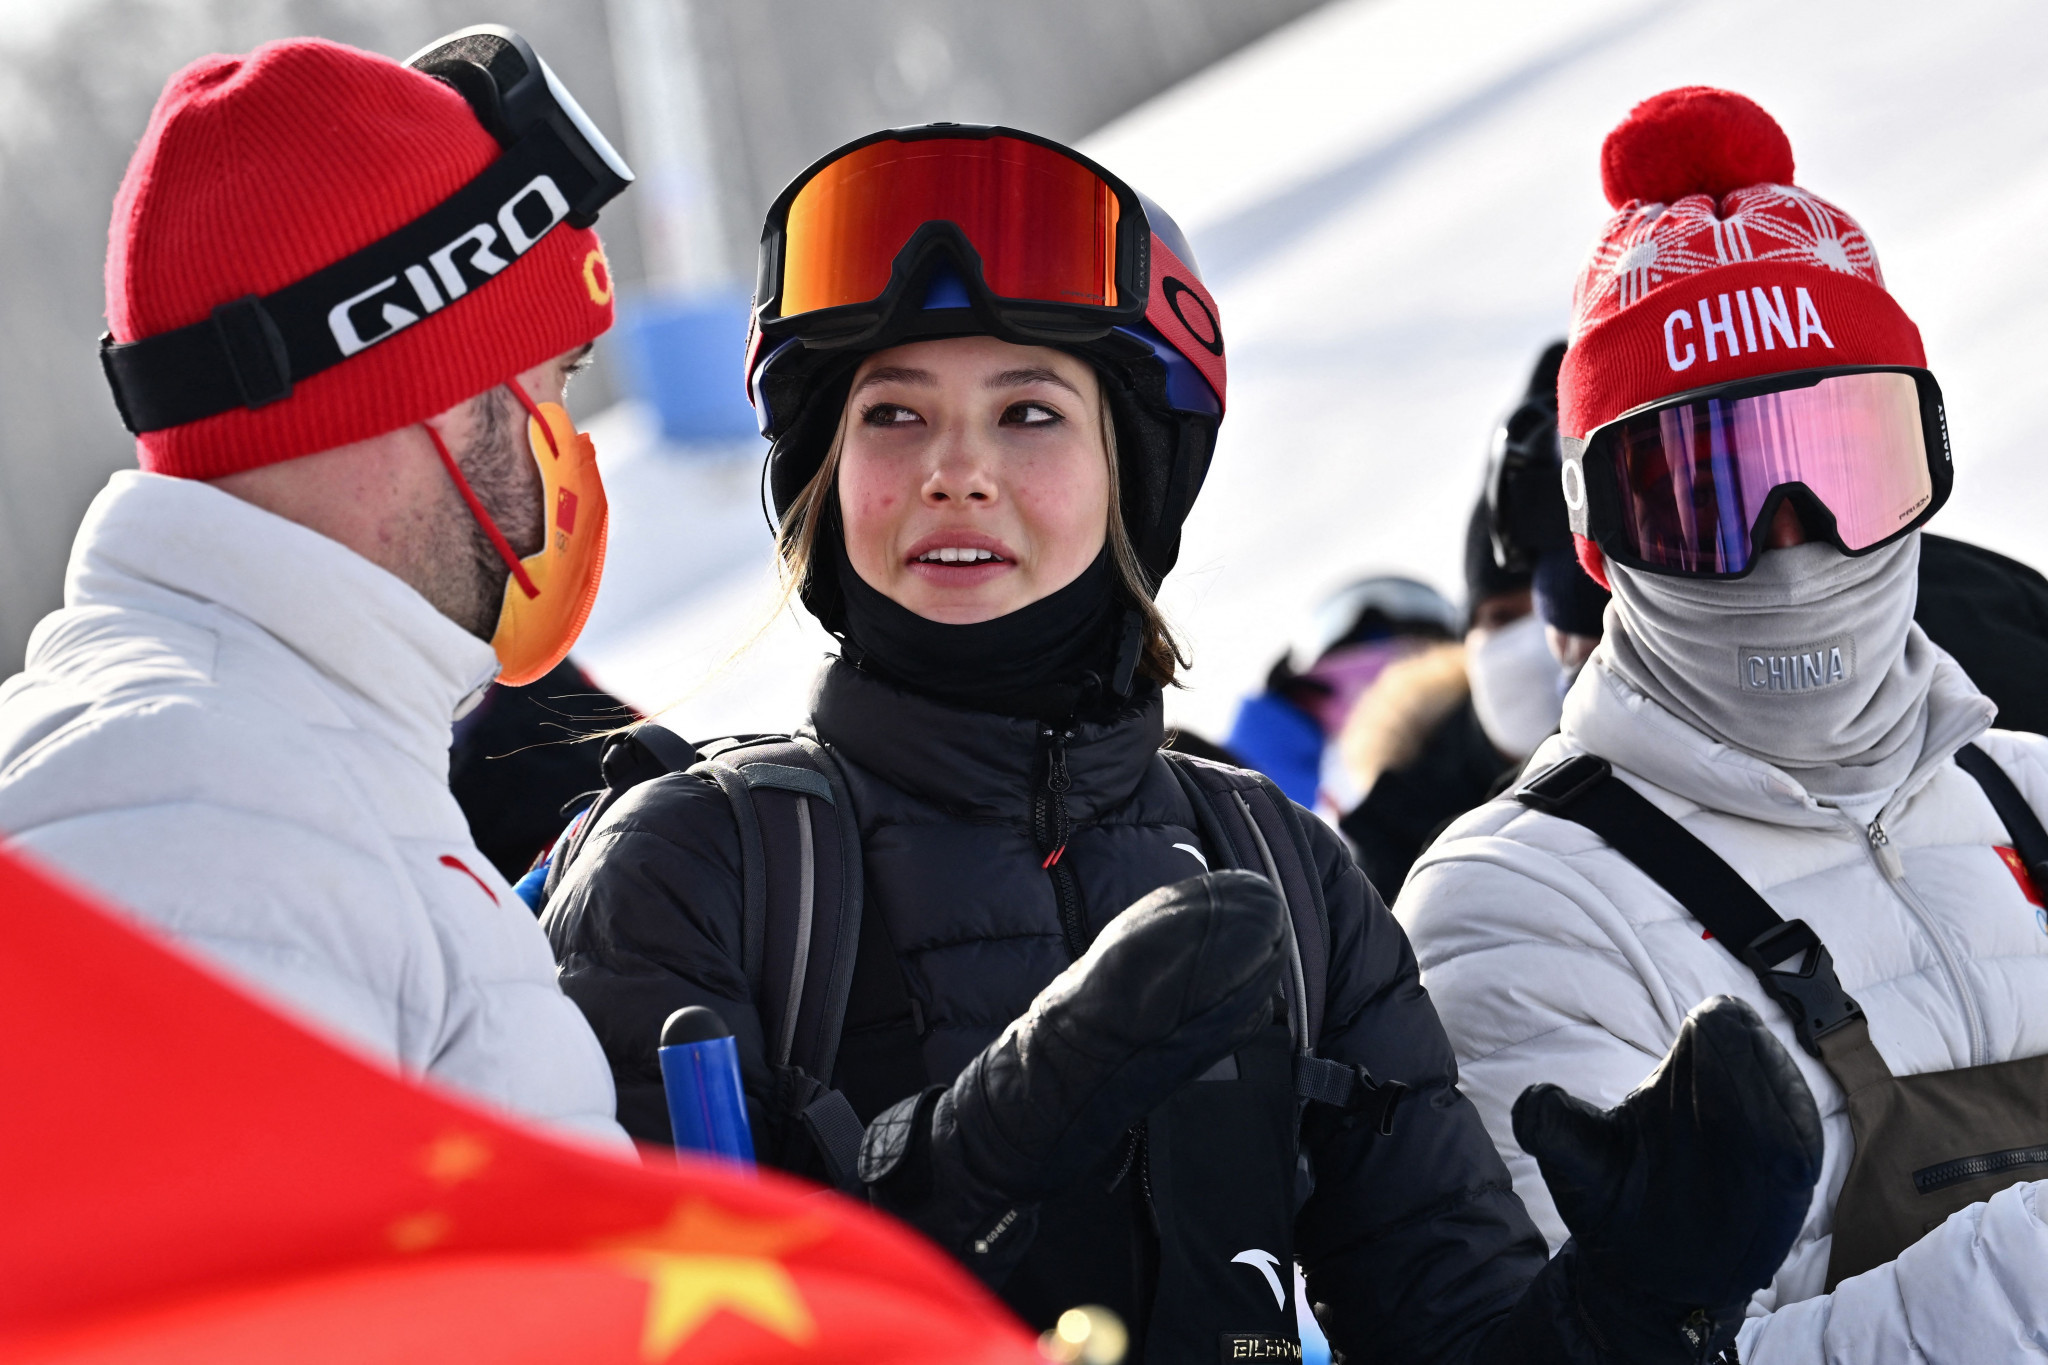 Eileen Gu's citizenship switch from the United States to China has been investigated by the media following her Olympic gold medal victory in the ski big air at Beijing 2022 ©Getty Images